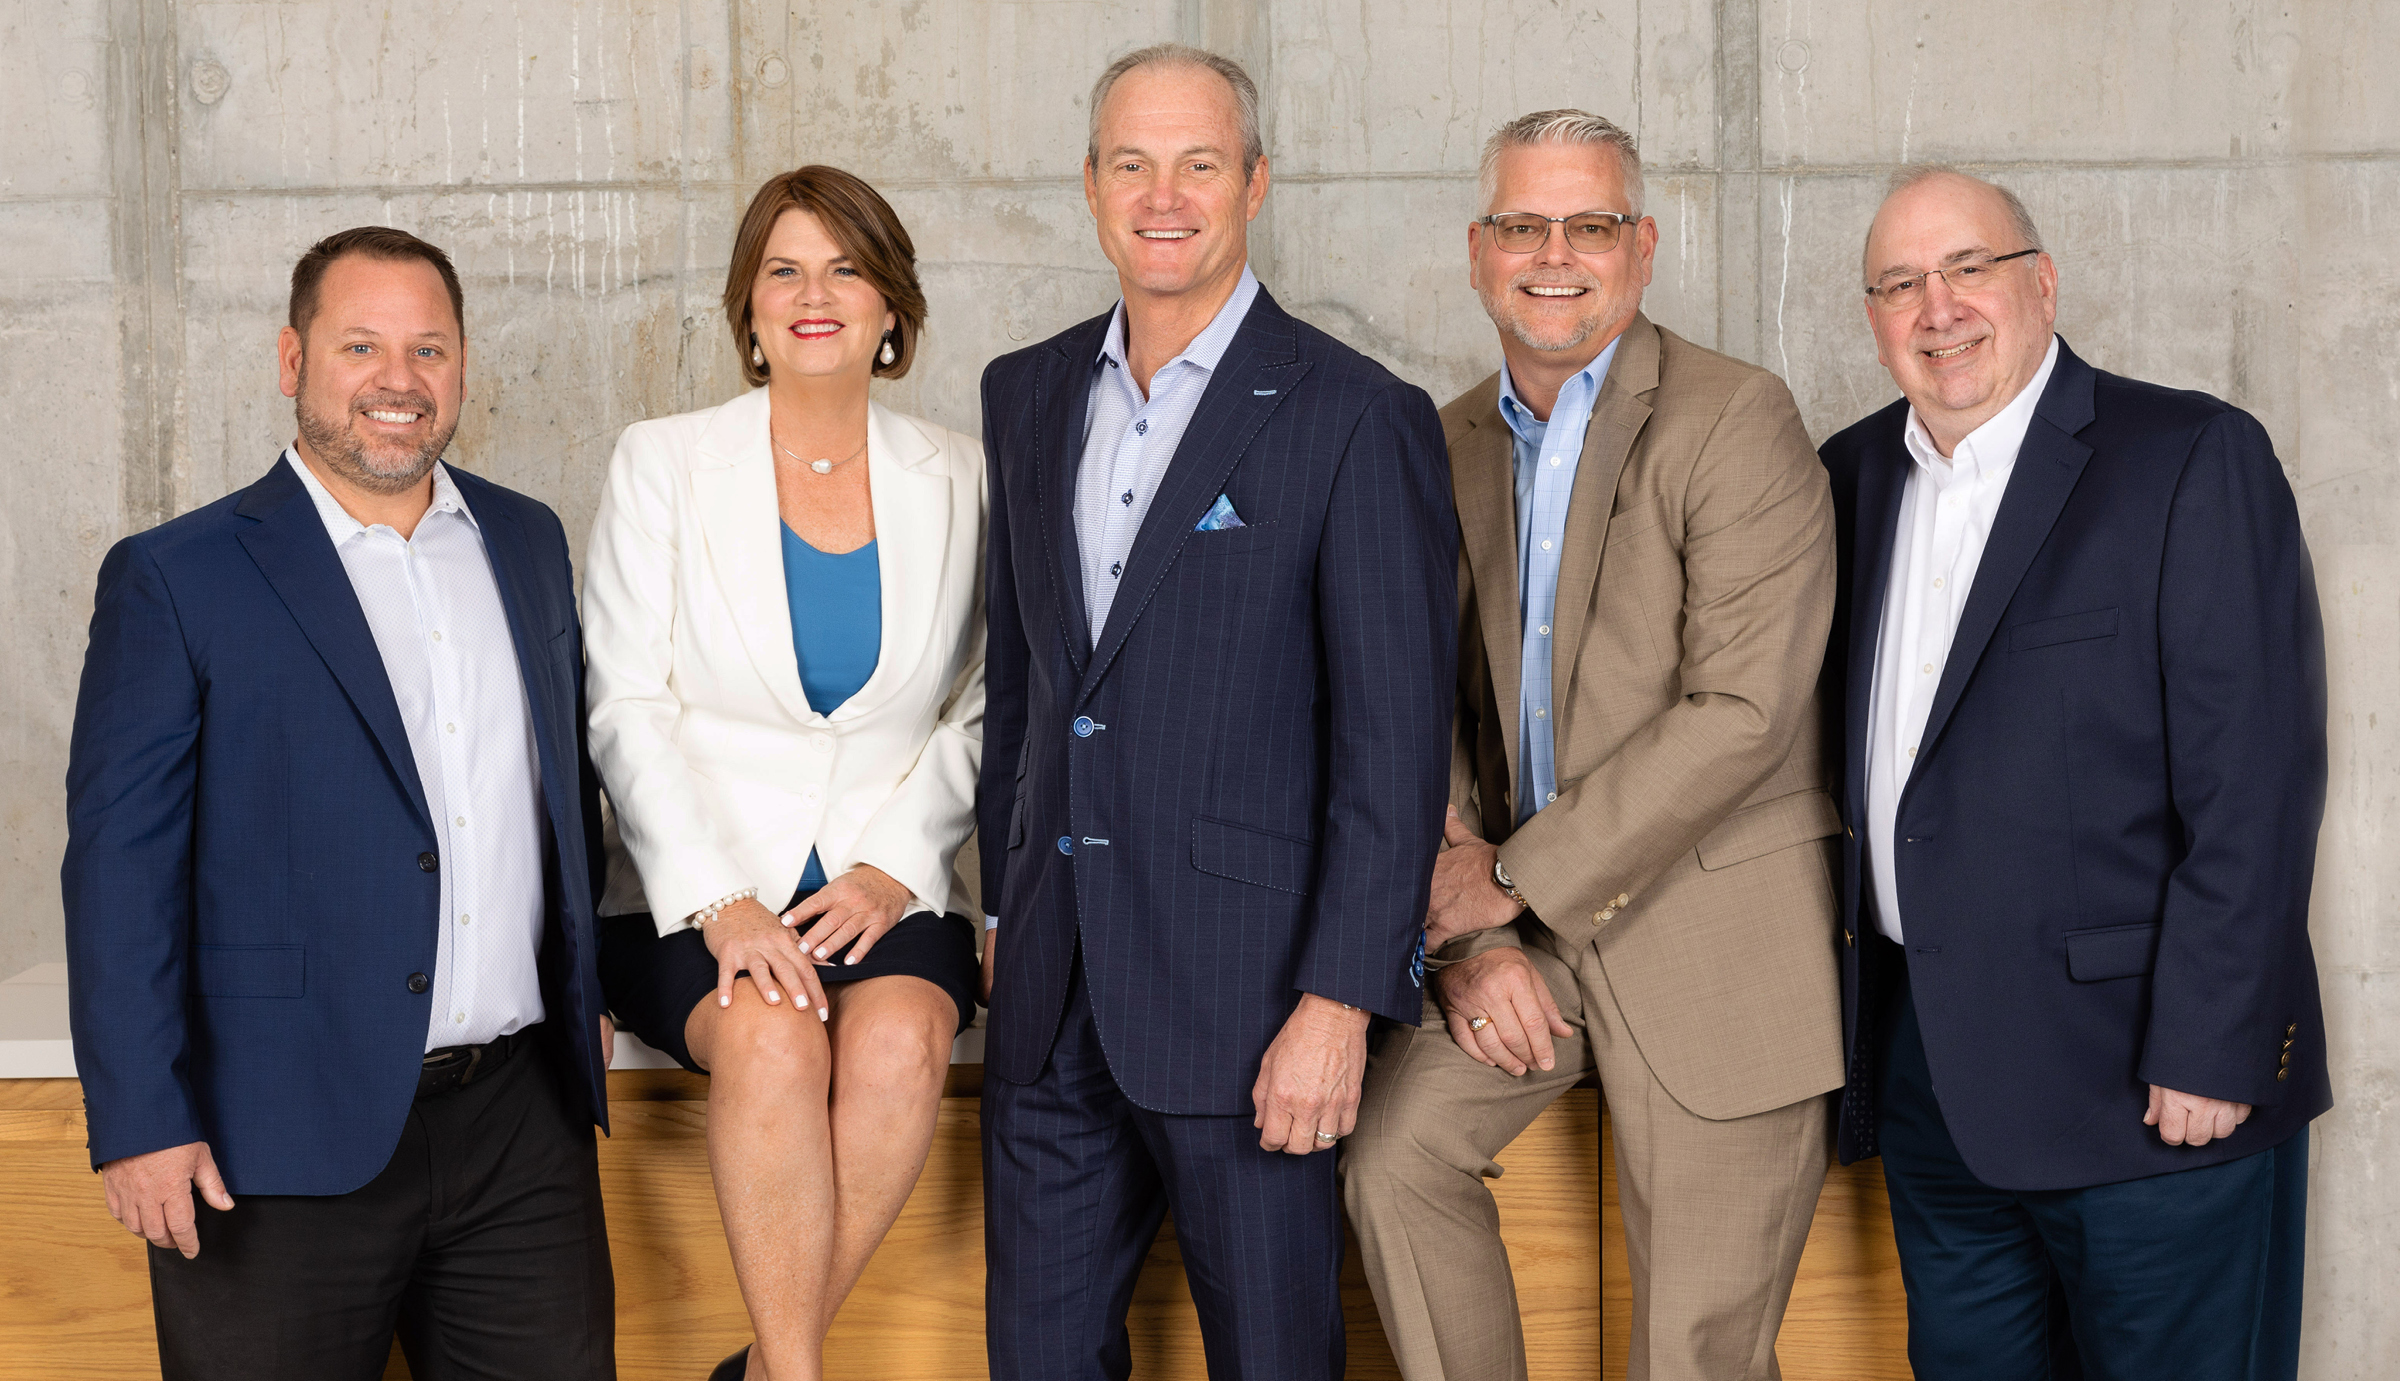 Verdex Construction Leadership Team - From left to right, Brad Stull, Chief Estimator; Lisa King, VP of Business Development; Rex Kirby, CEO; Alex Smith, VP of Operations; Andrew Colb, CFO